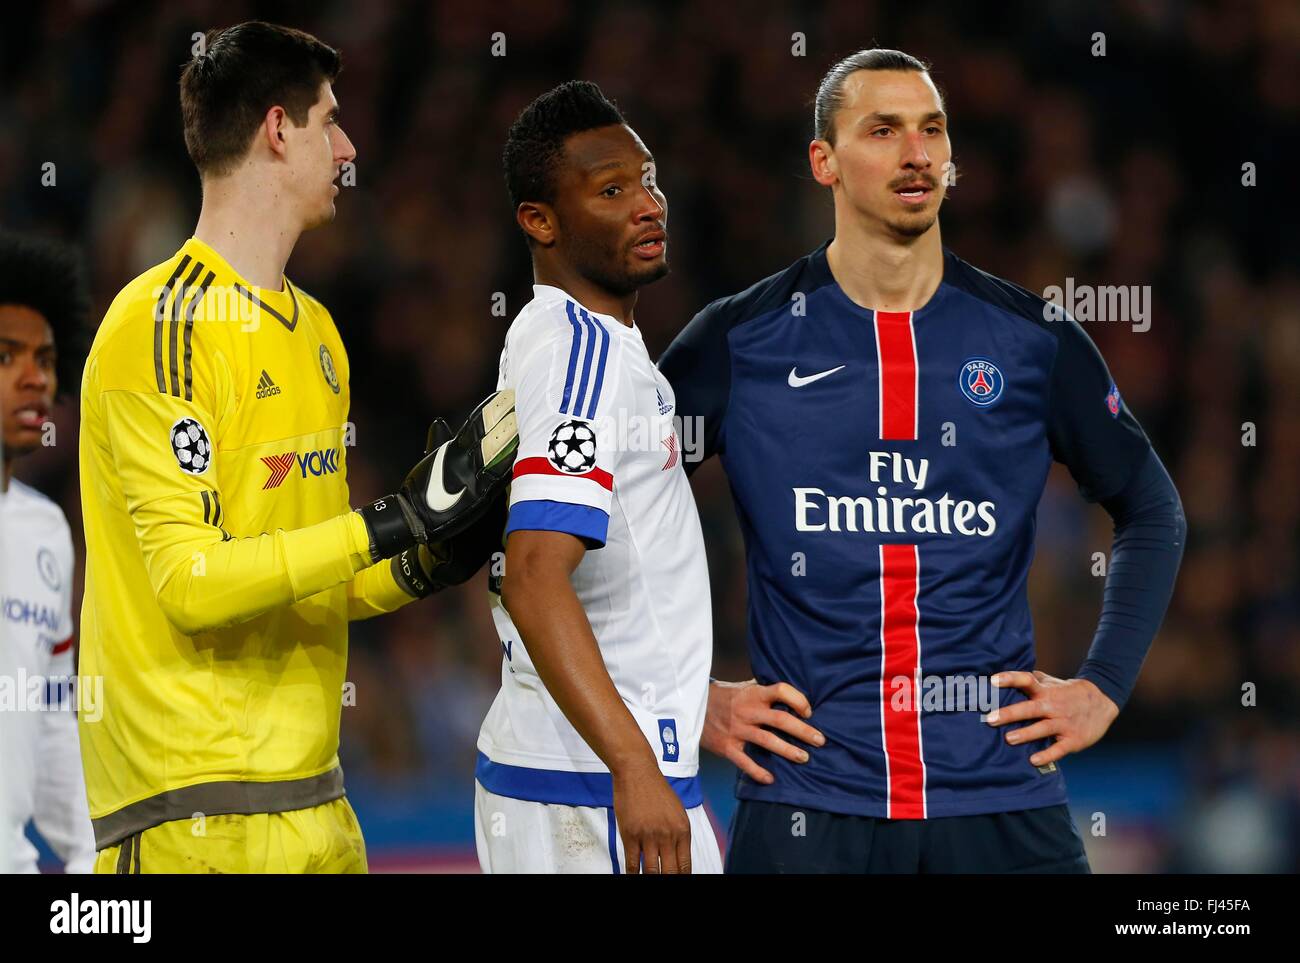 Chelsea’s keeper Thibaut Courtois,  Mikel John Obi and Zlatan Ibrahimovic of PSG seen during the UEFA Champions League round of 16 match between Paris Saint-Germain and Chelsea at the Parc des Princes Stadium in Paris. February 16, 2016. James Boardman / Telephoto Images +44 7967 642437 Stock Photo